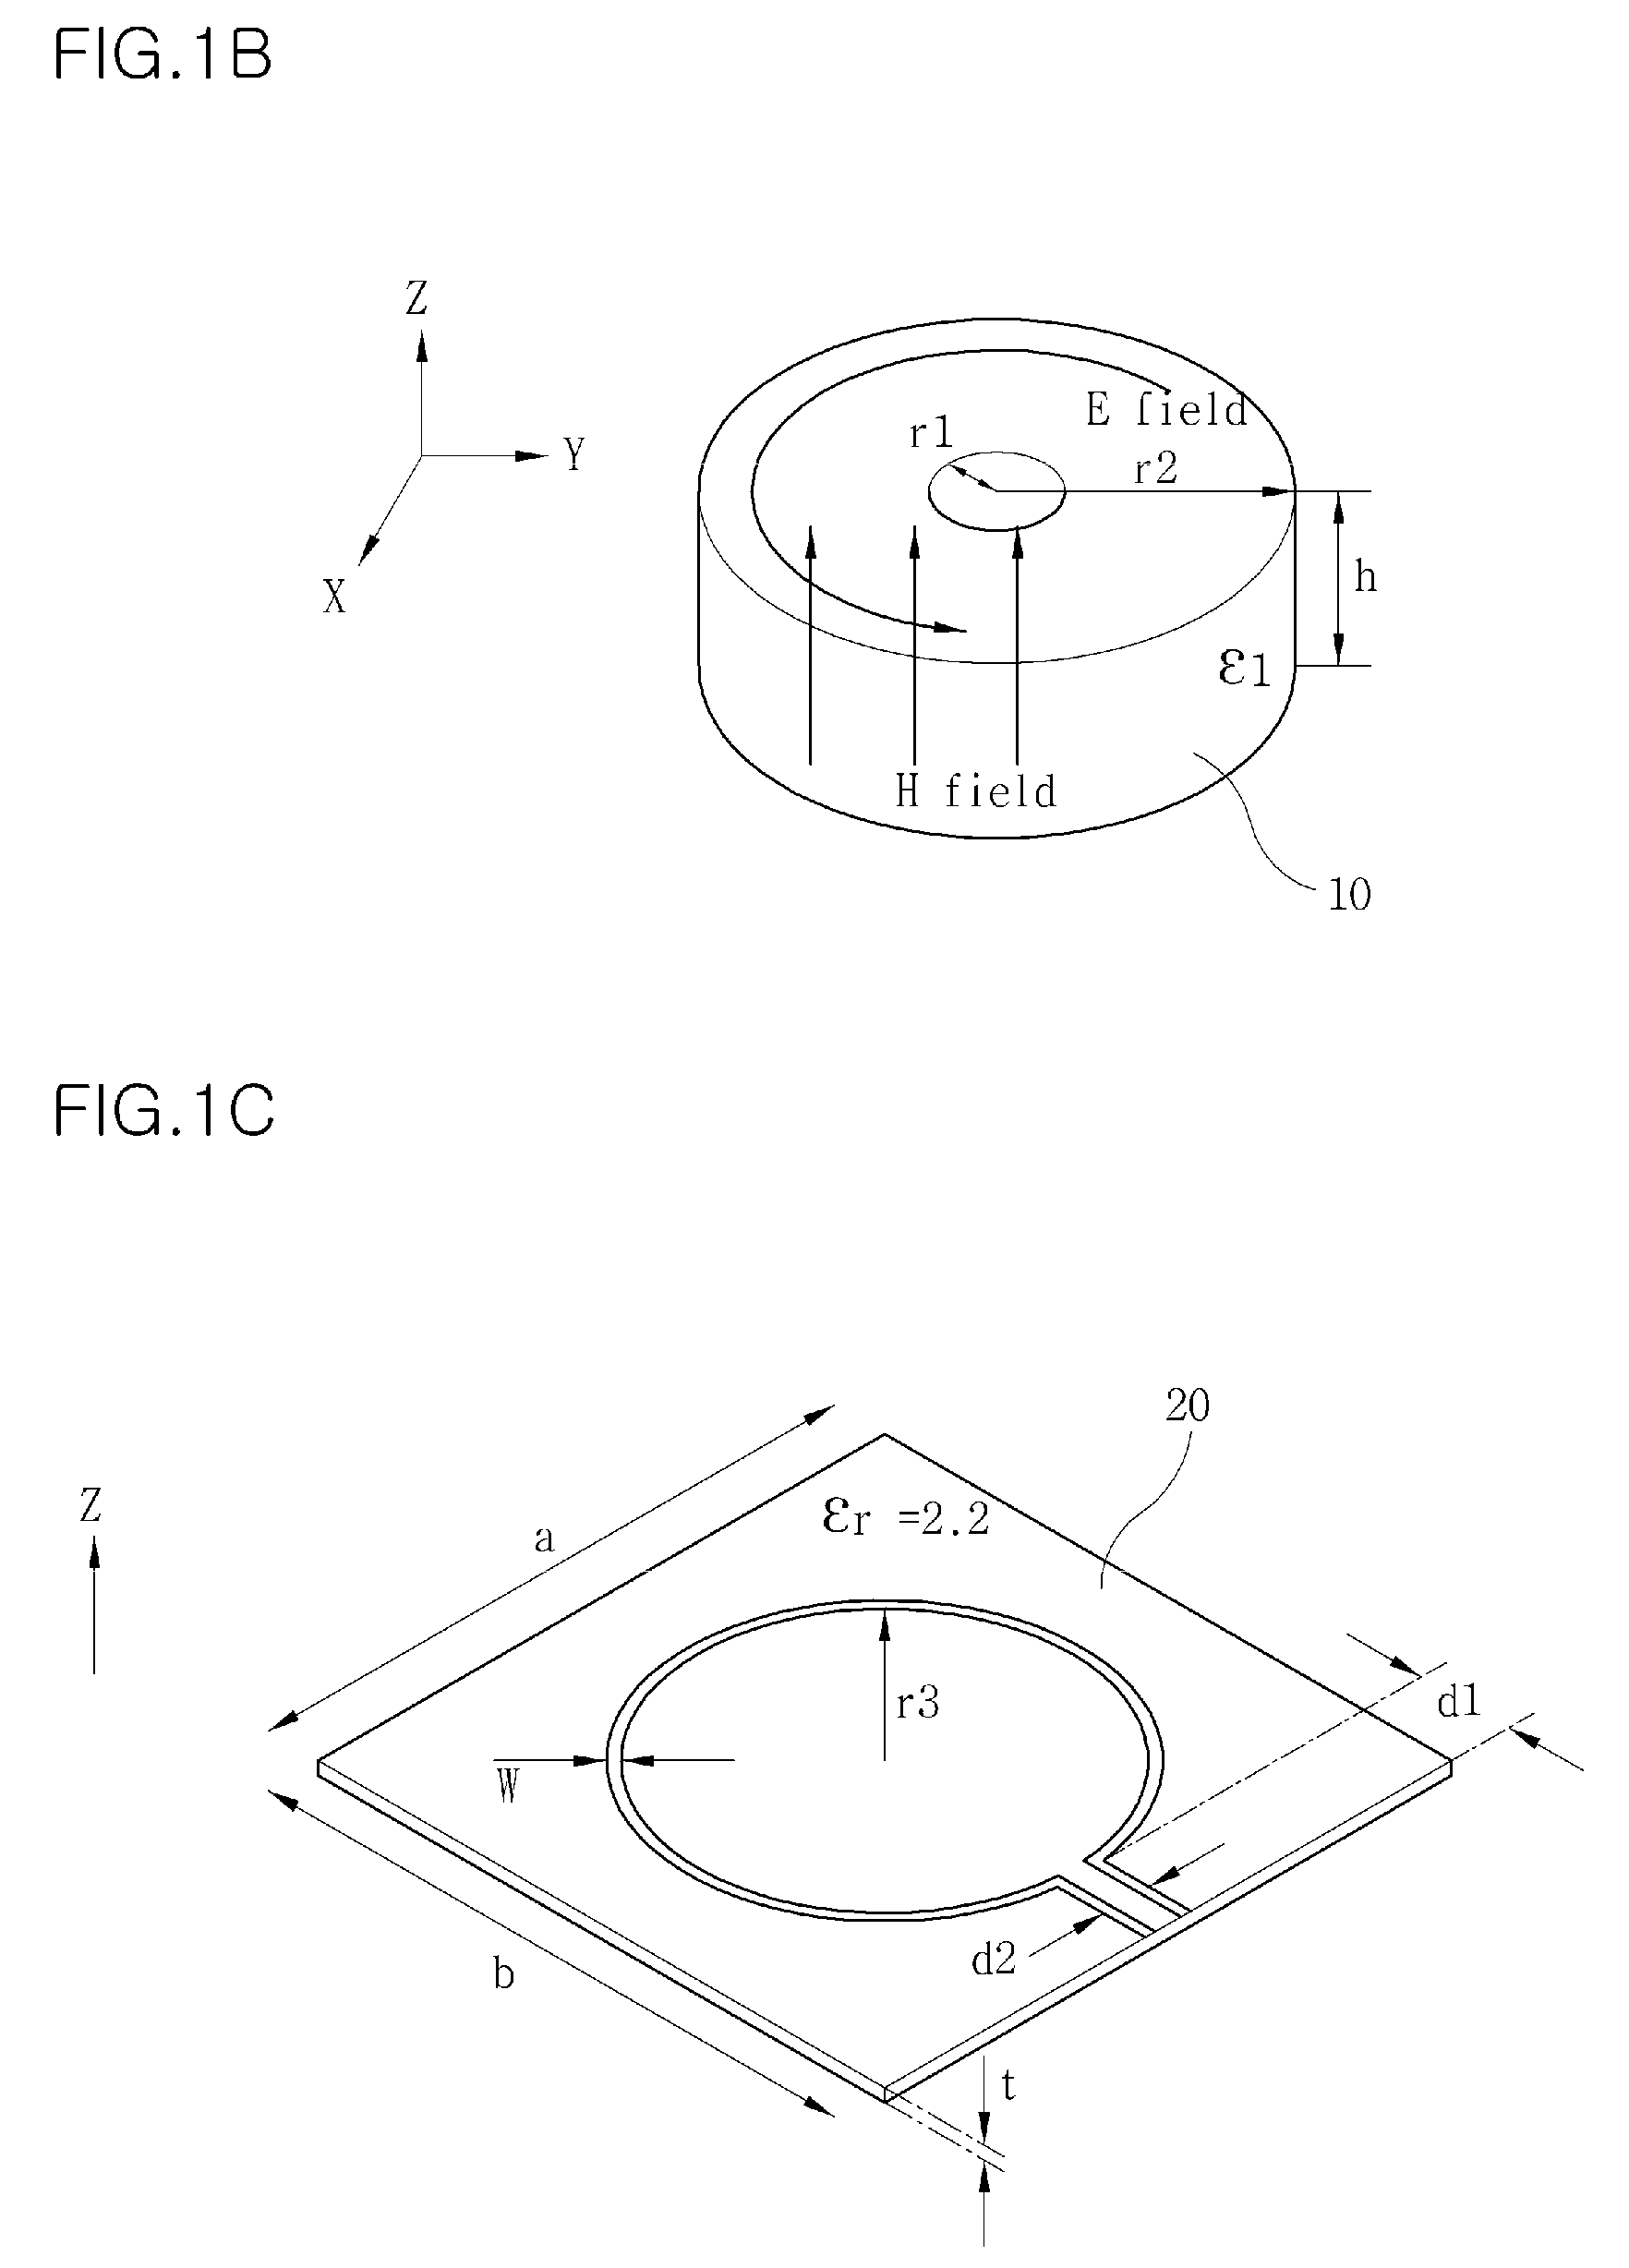 Apparatus and system for transmitting power wirelessly